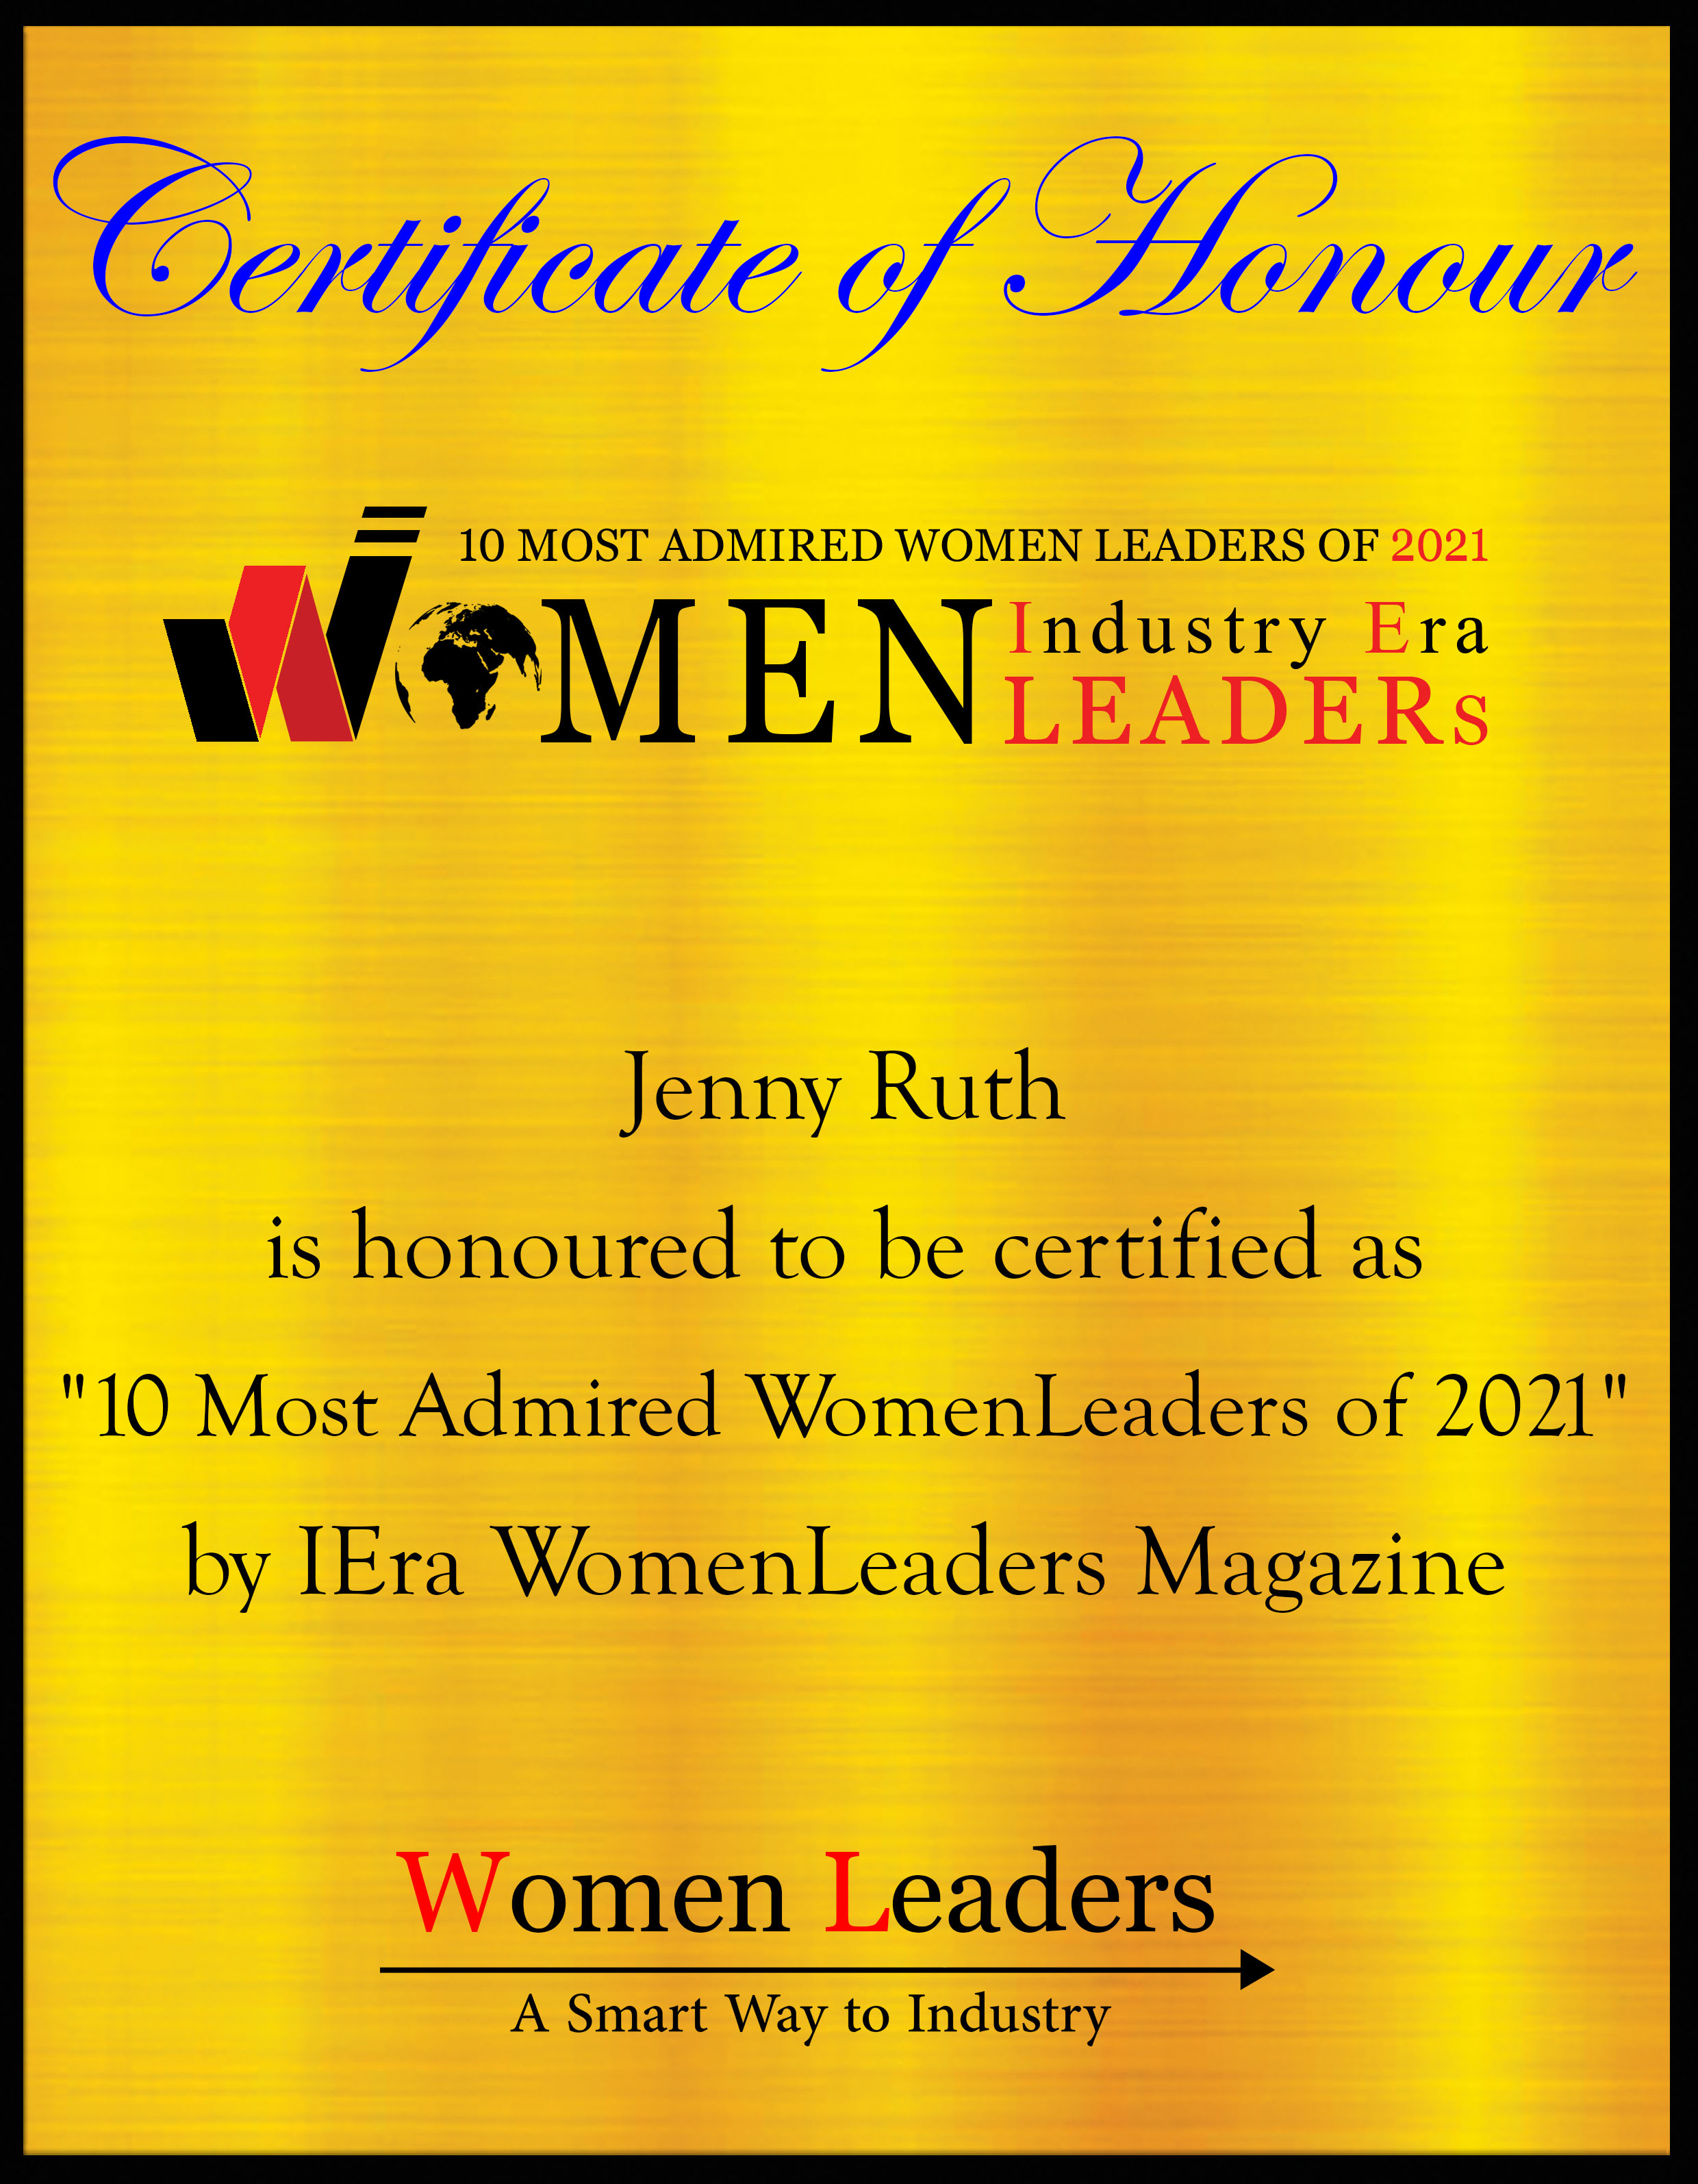 Jenny Ruth, CEO Of Emergency Construction Group, Most Admired WomenLeaders of 2021